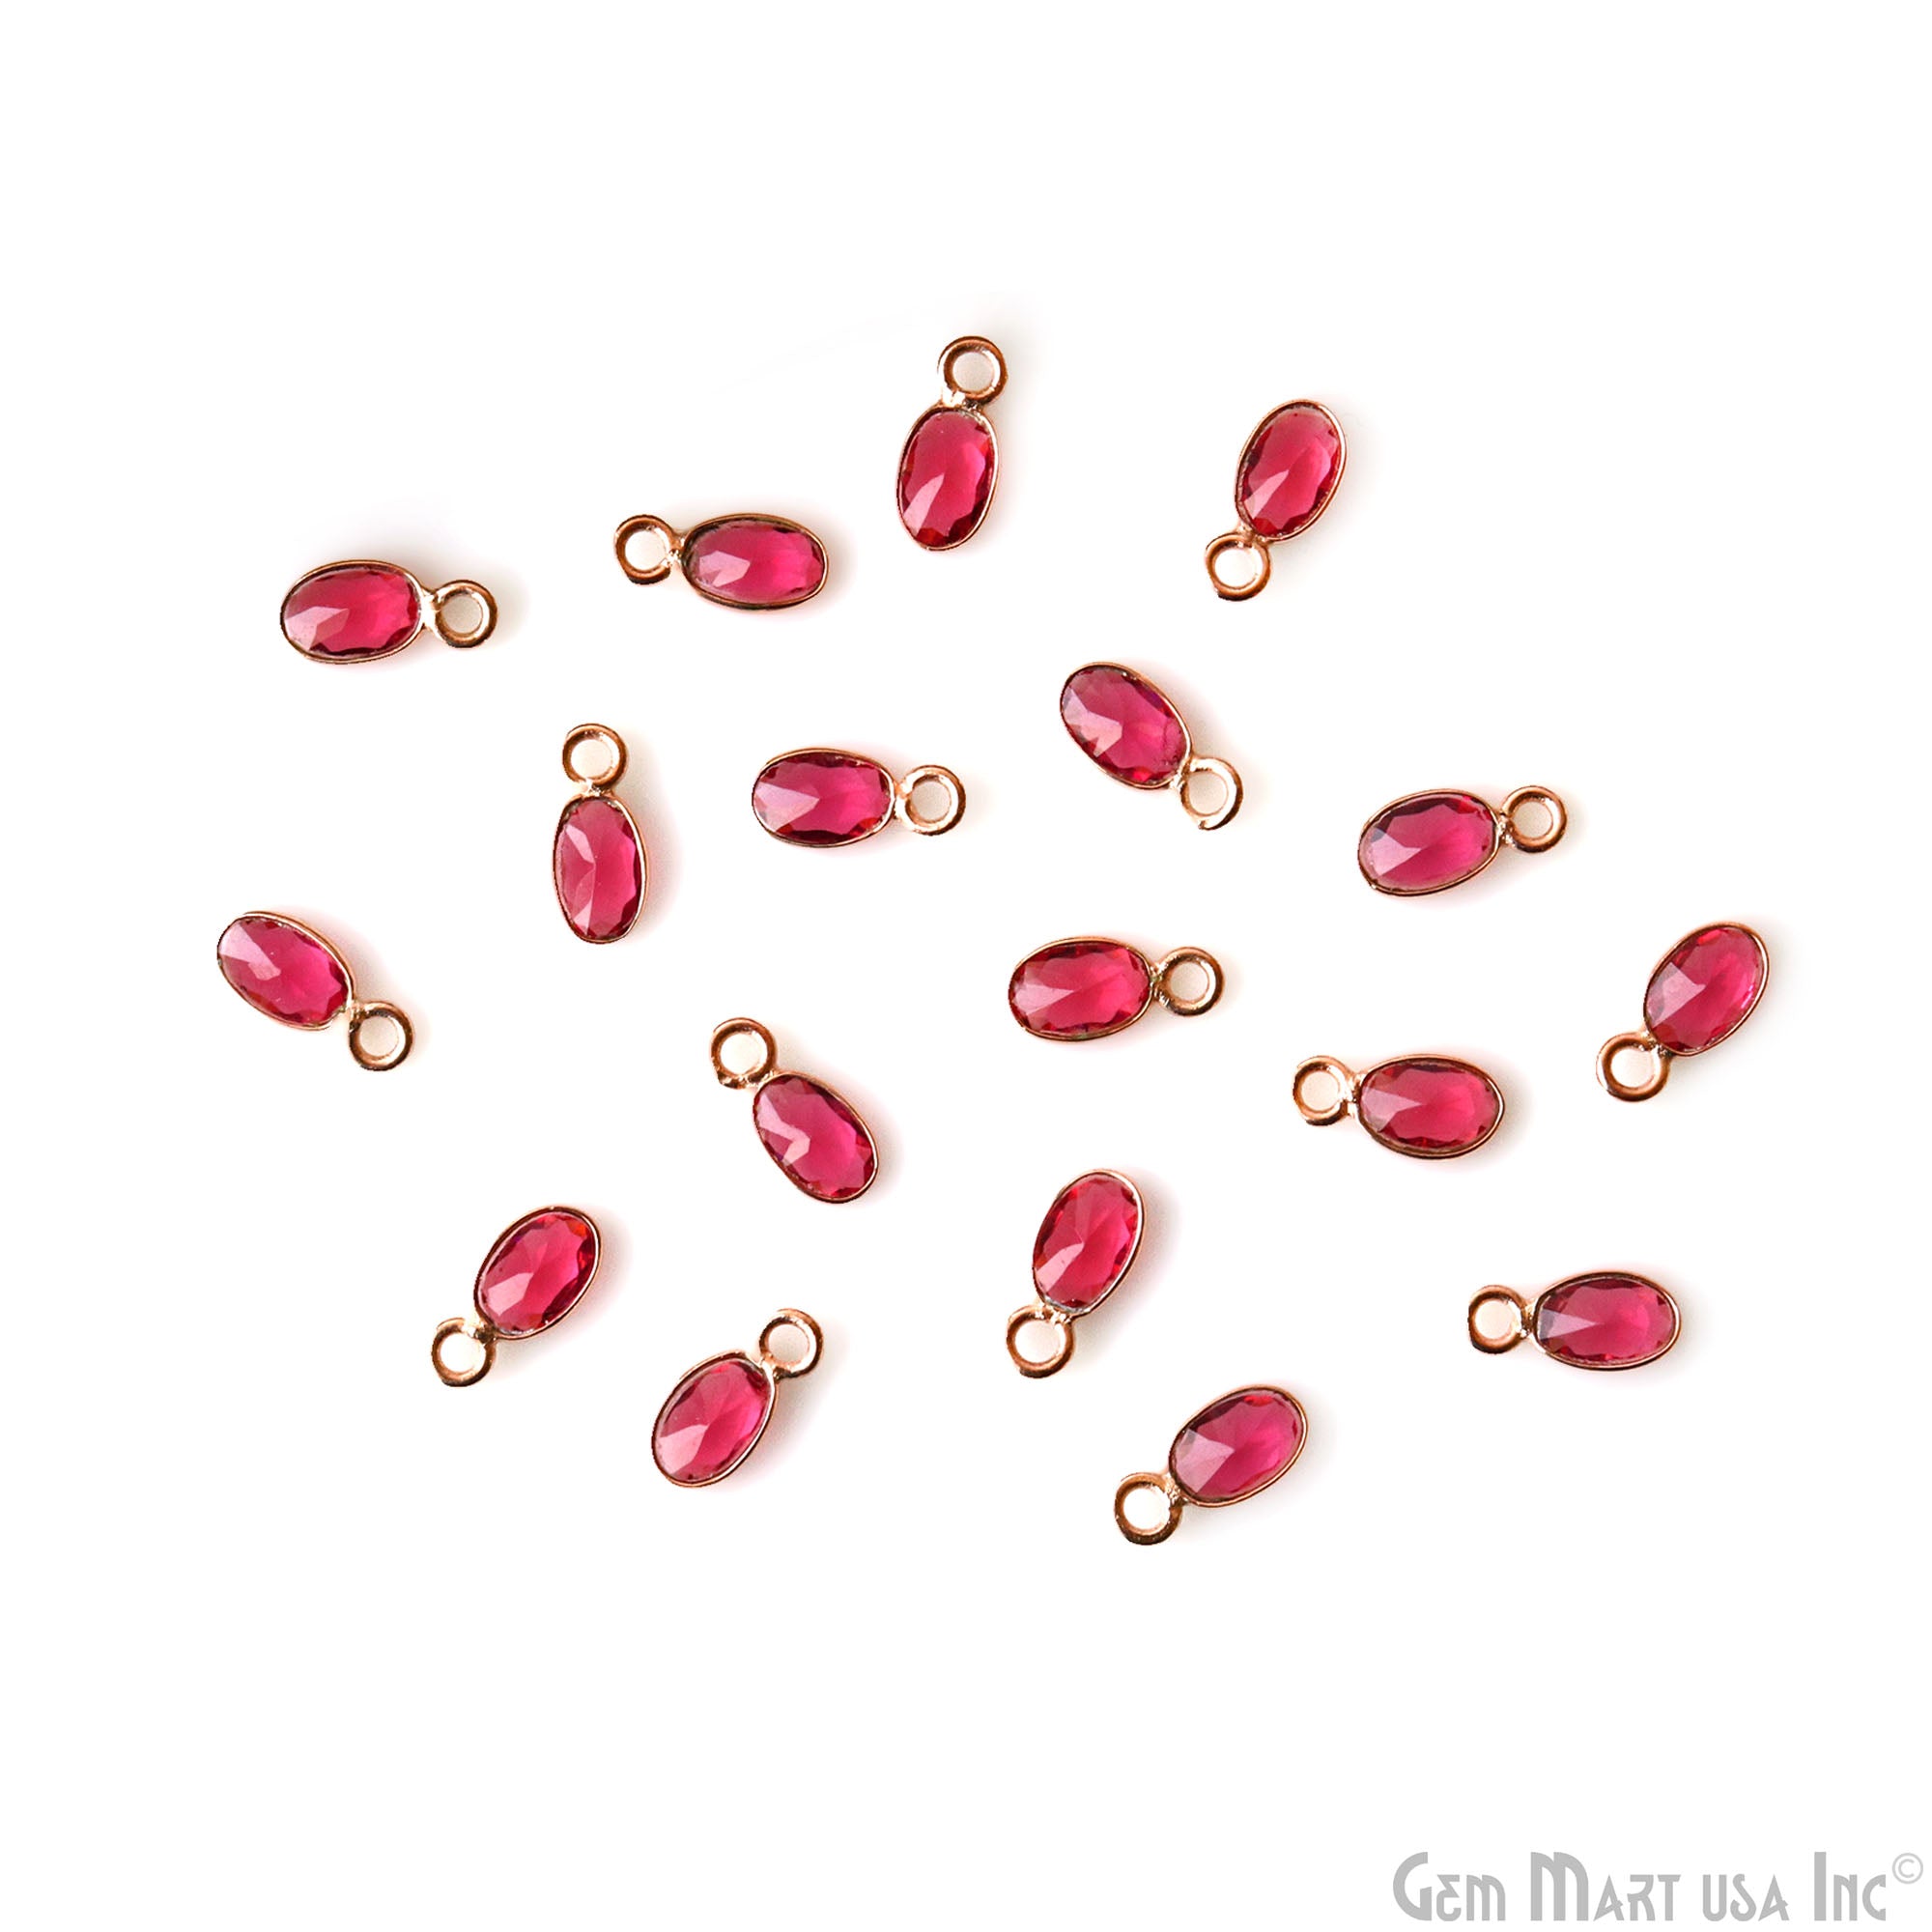 5pc Lot Pink Tourmaline Oval 4x3mm Rose Gold Plated Single Bail Brilliant Cut Gemstone Connector